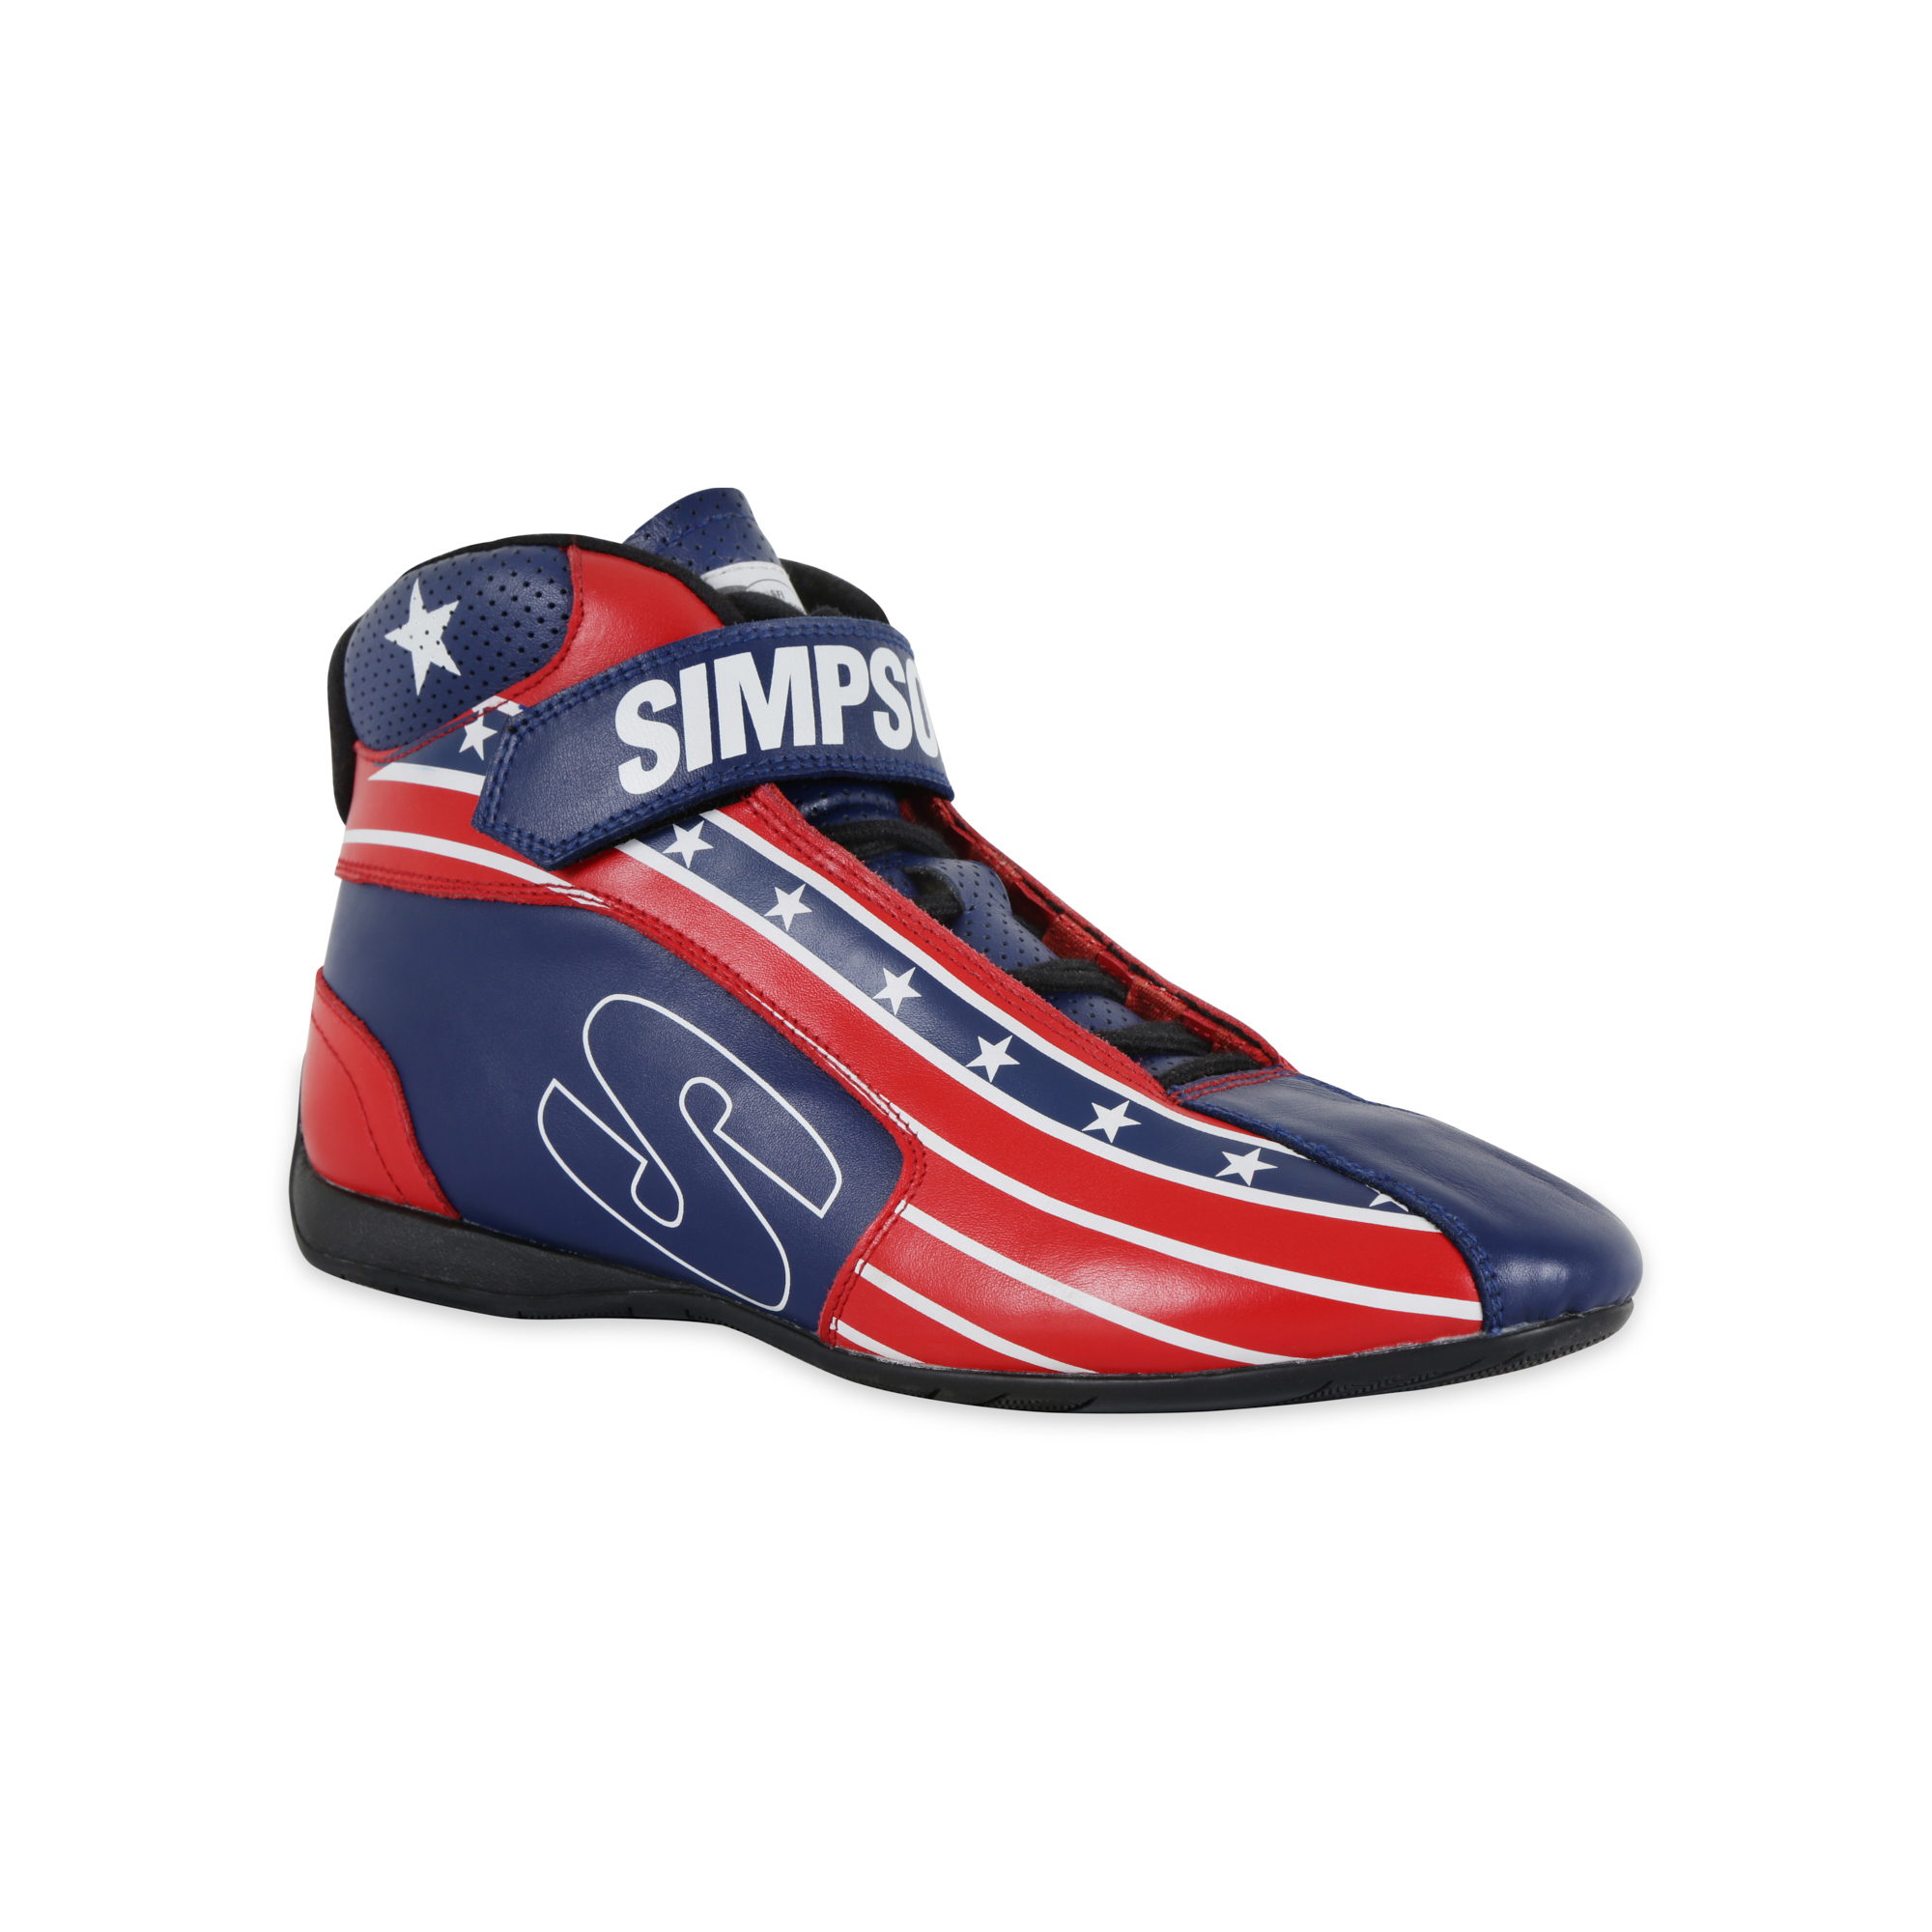 Simpson Safety DX2110P Shoe, DNA X2 Patriot, Mid-Top, SFI 3.3/5, Leather Outer, Nomex Inner, Red / White / Blue, Size 11, Pair